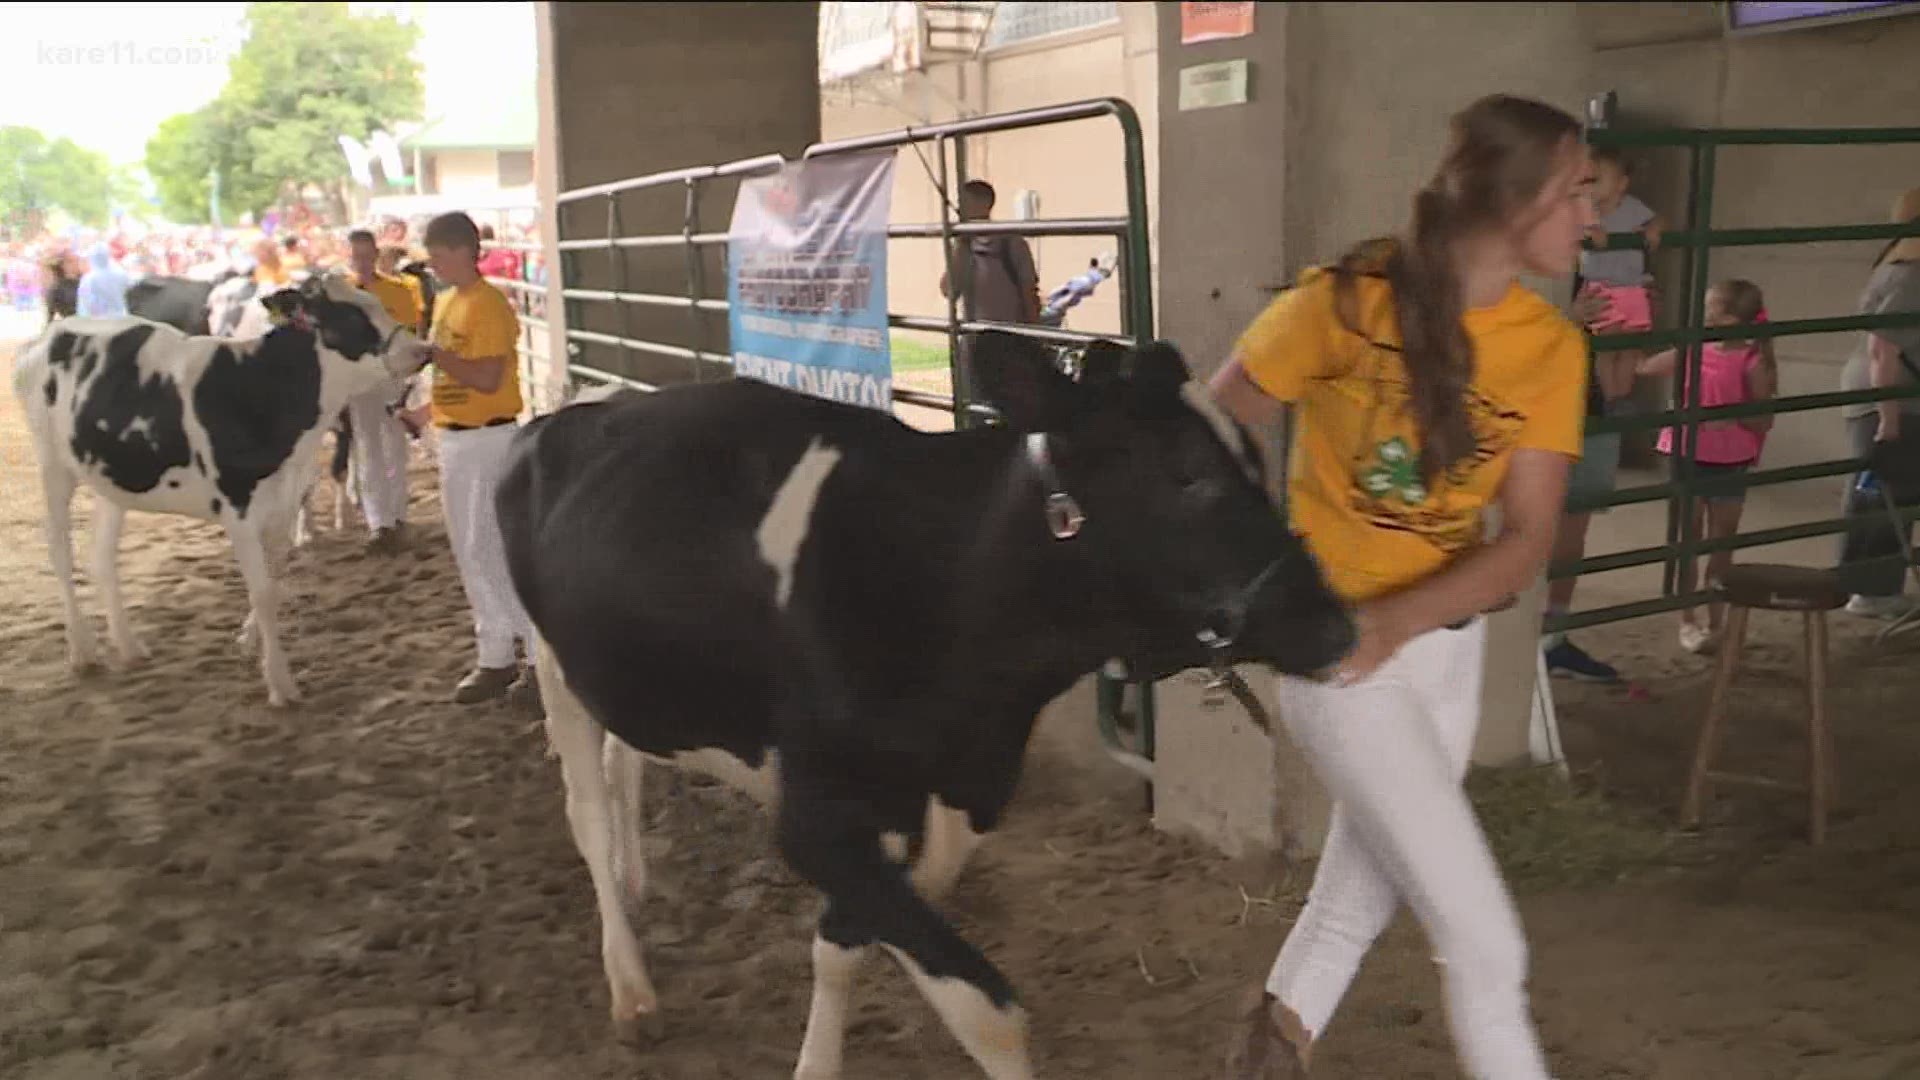 Minnesota 4-H pivoted after the cancellation of the MN State Fair, making plans to take the annual 4-H livestock shows virtual.